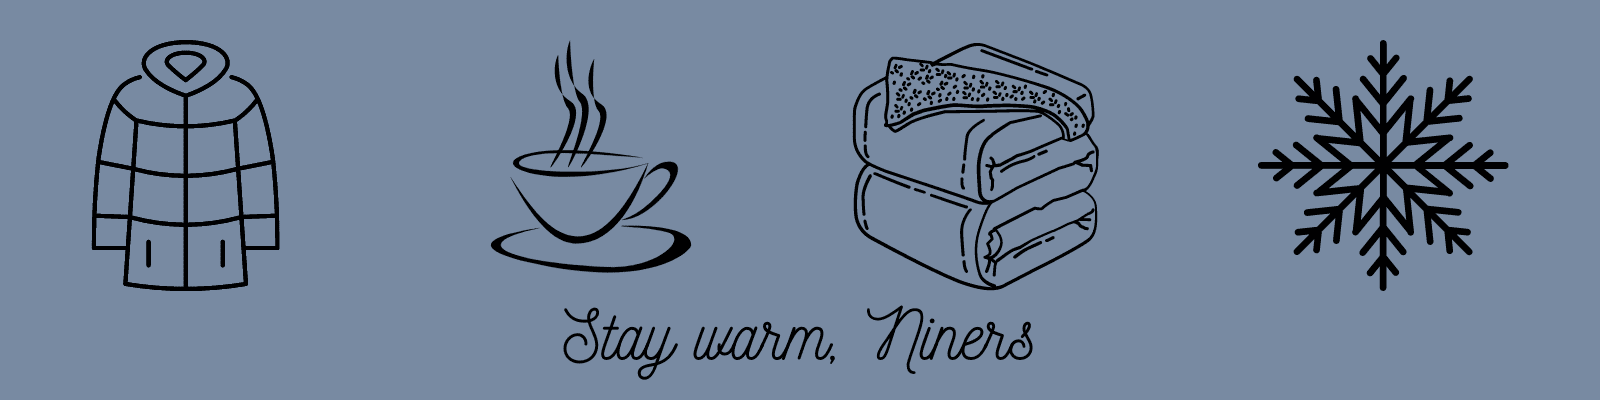 Stay warm poll image